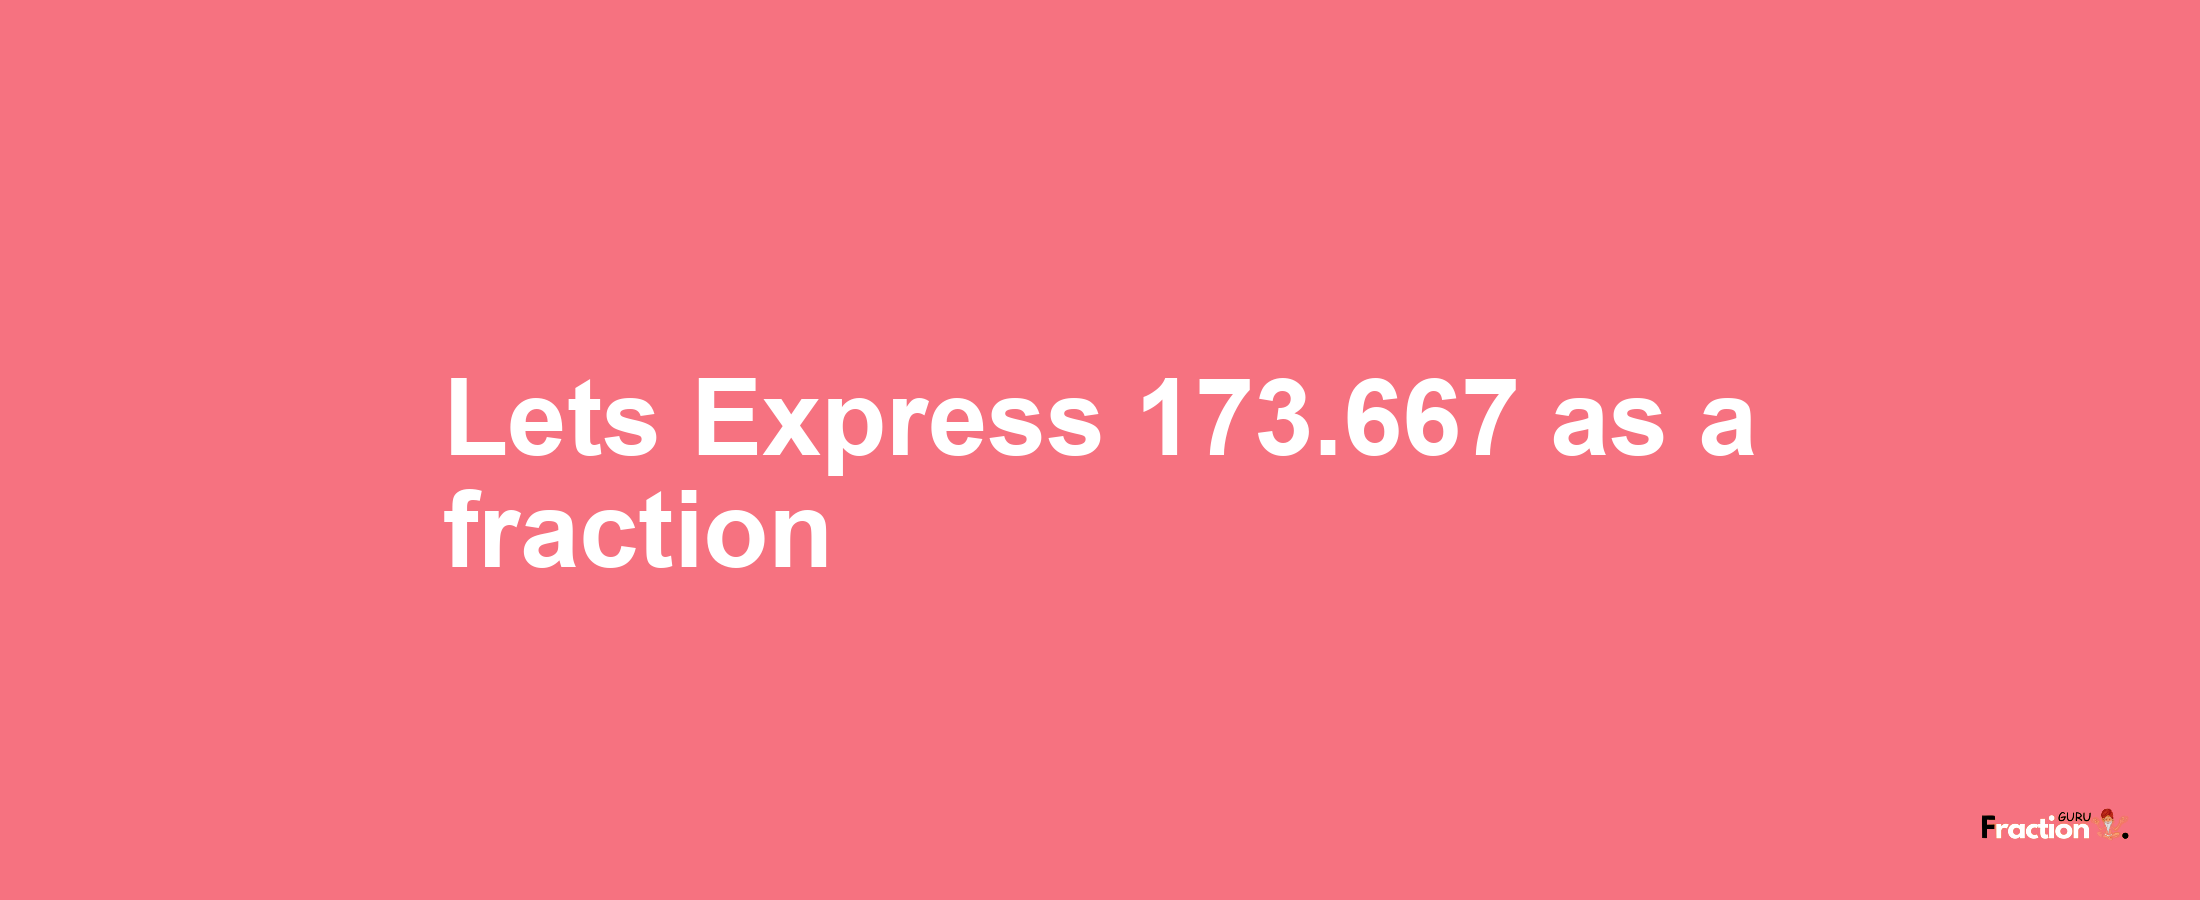 Lets Express 173.667 as afraction